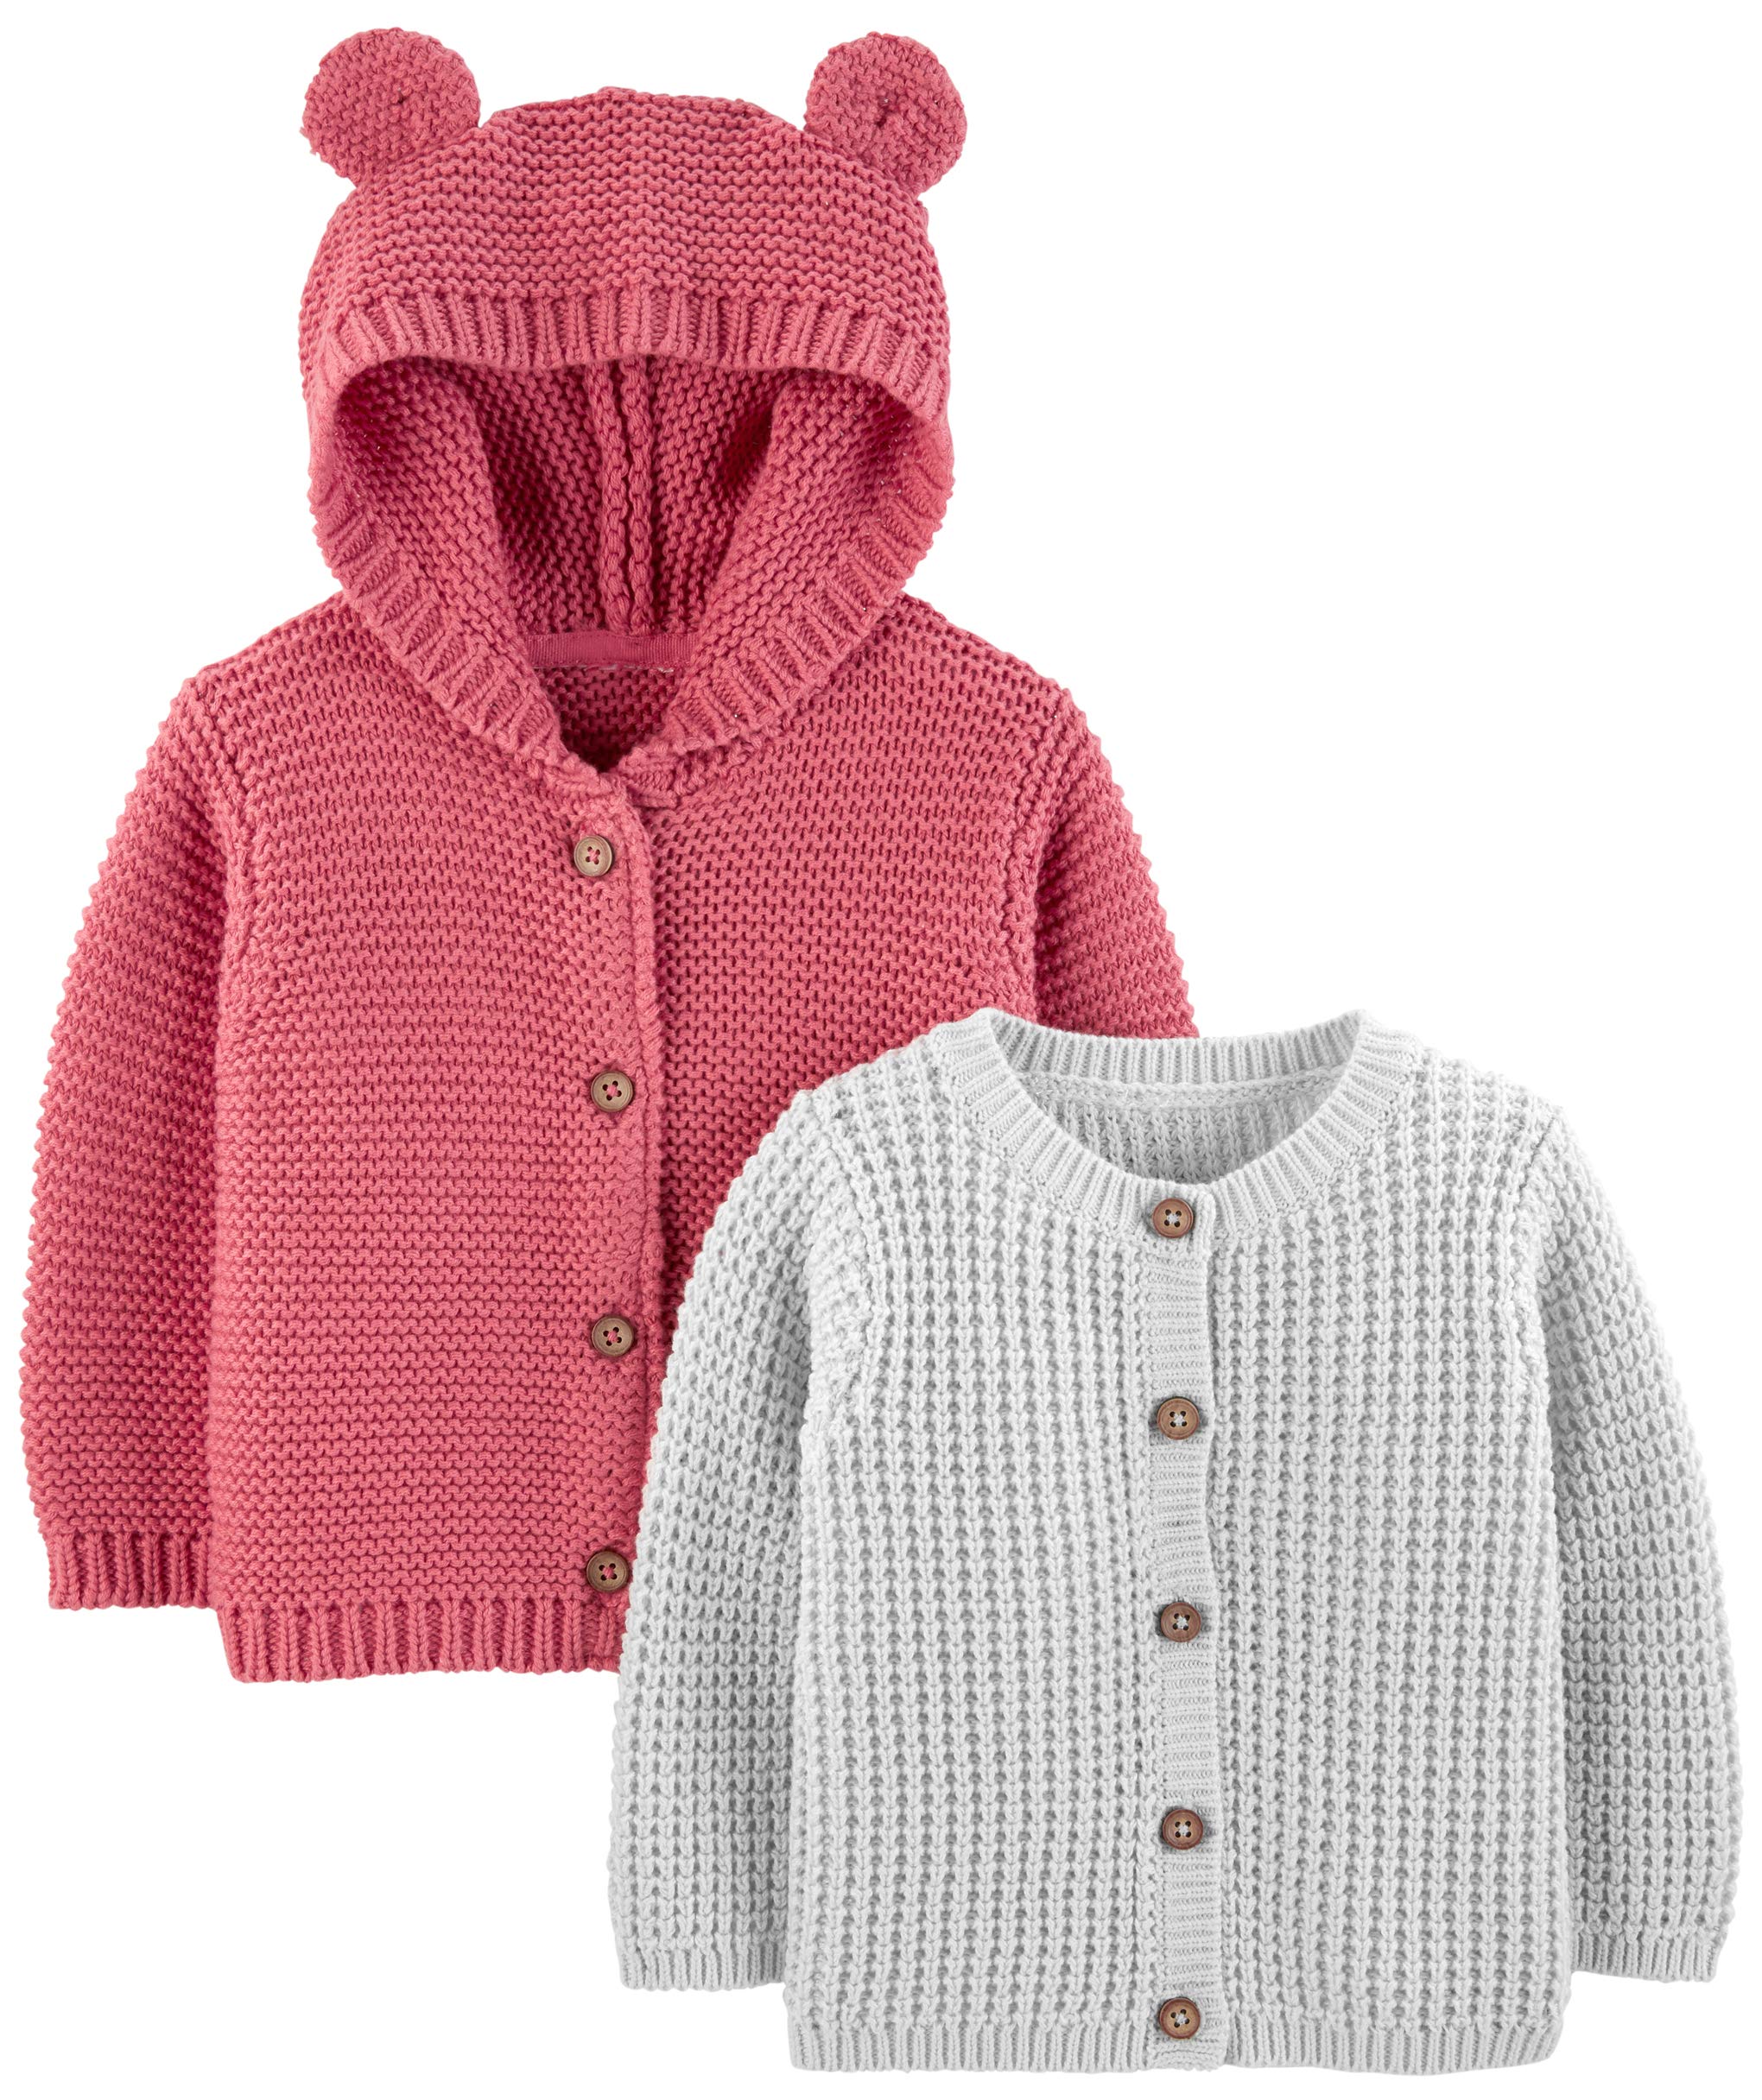 Simple Joys by Carter's Unisex Babies' Knit Cardigan Sweaters, Pack of 2, Grey/Red, 24 Months